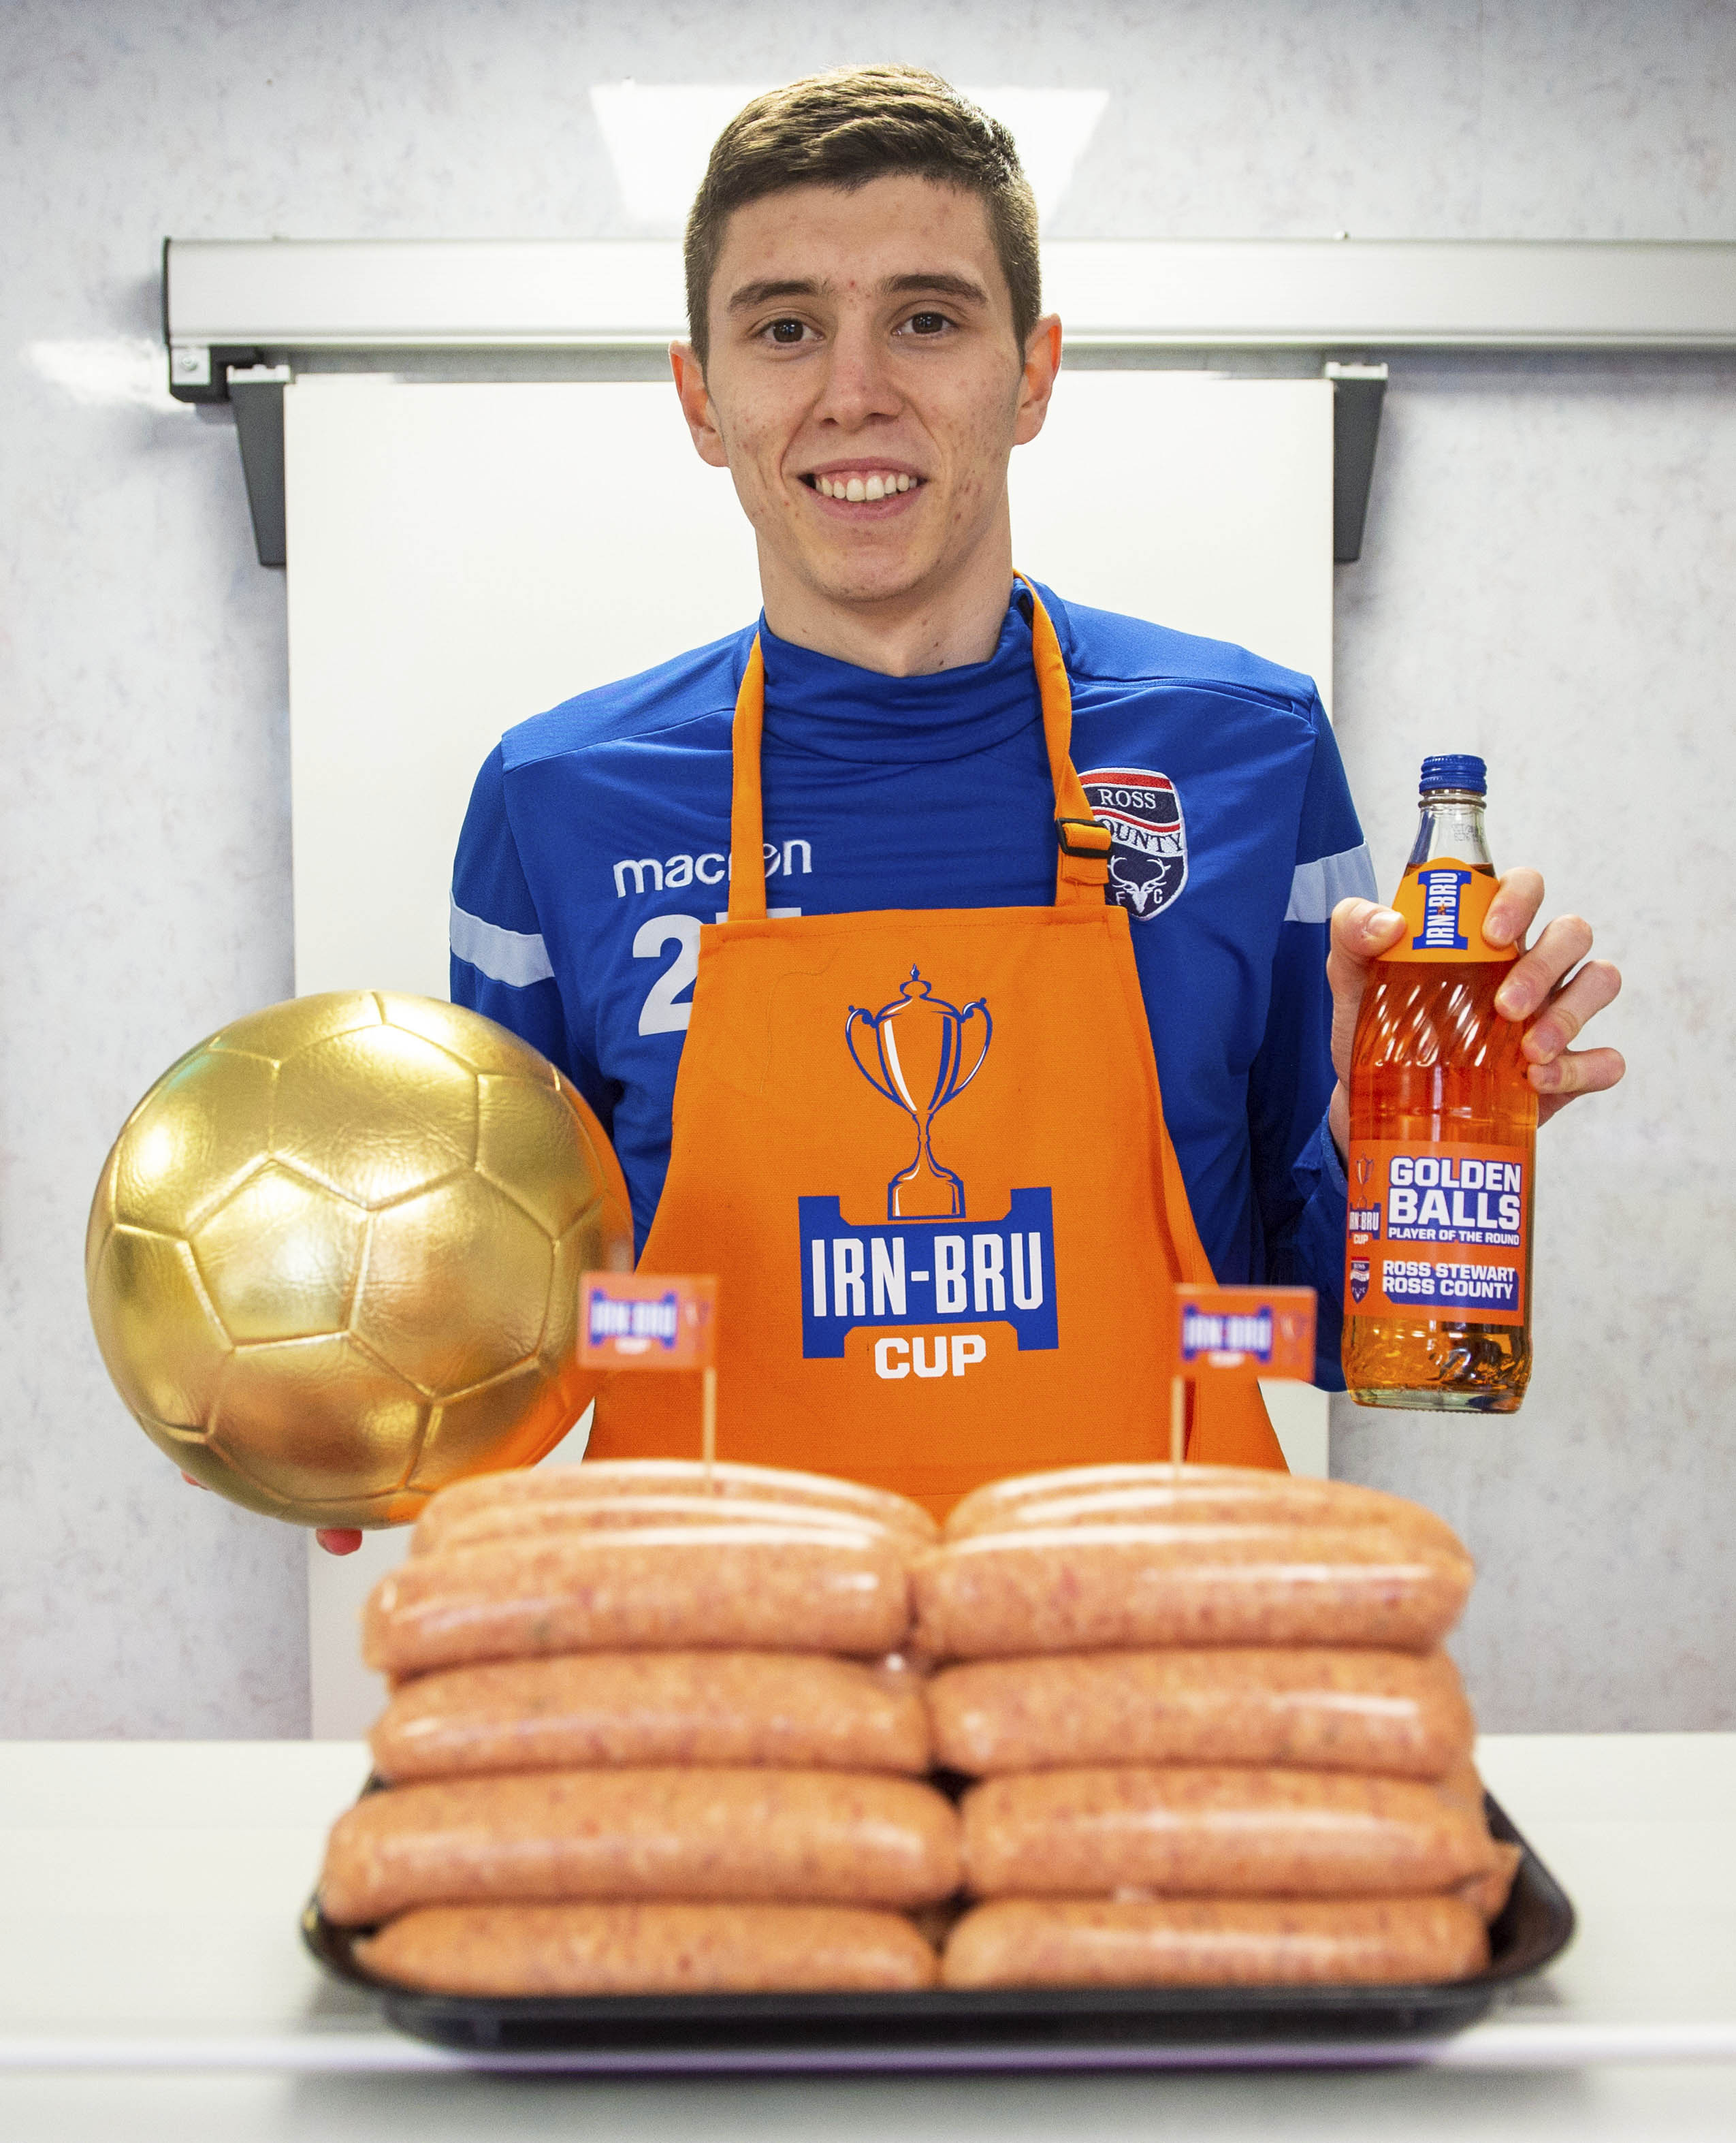 28/02/19
COCKBURN'S BUTCHER - DINGWALL
Ross County's Ross Stewart collects his IRN-BRU Cup Goldenballs award for his performance in the semi-final's at local award winning butchers 'George Cockburn & Son' where they are selling IRN-BRU sausages in the run-up to the Cup final.